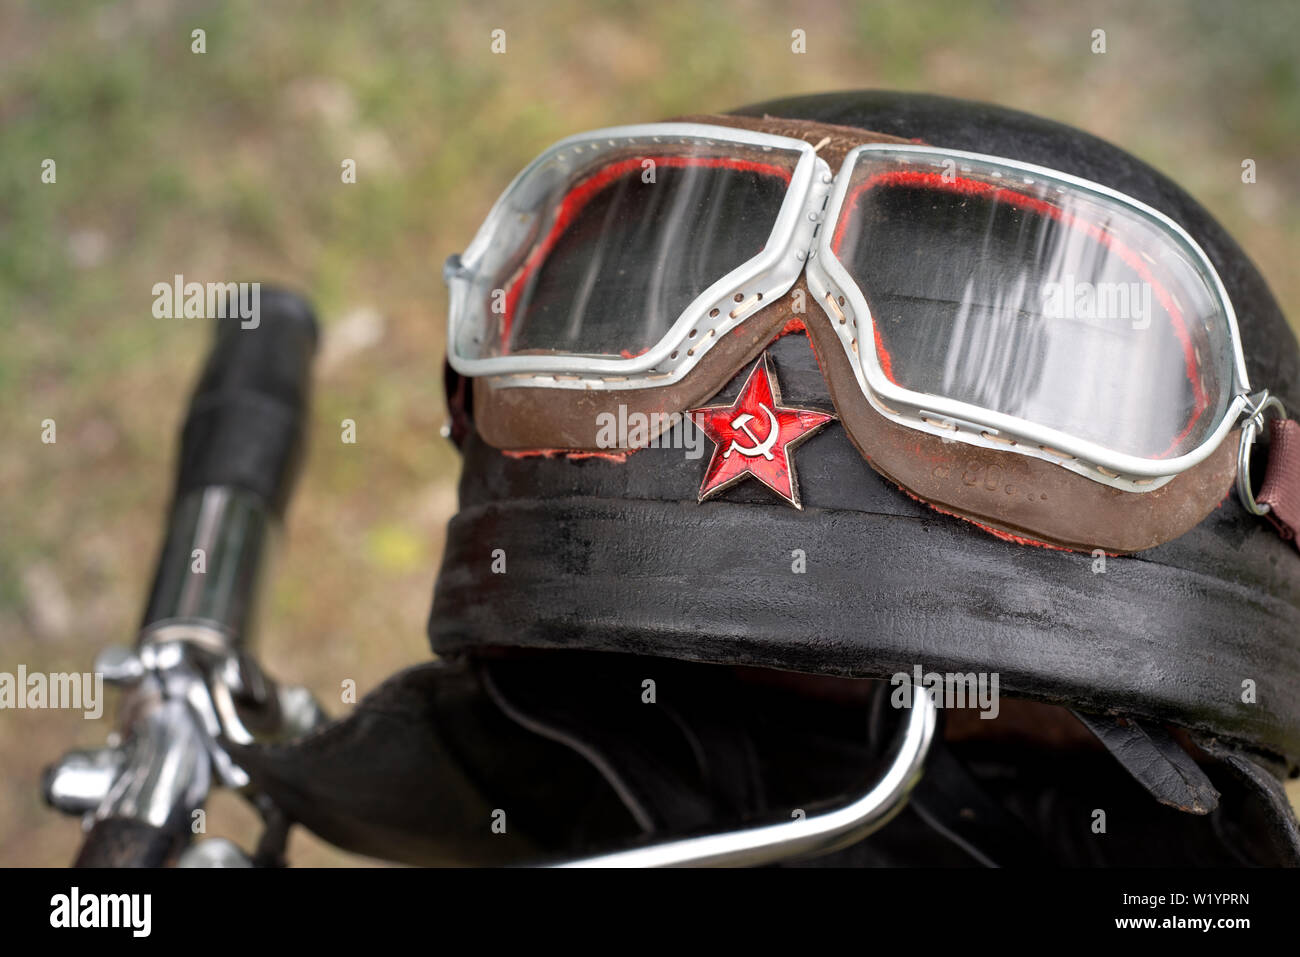 Italy, Lombardy, Meeting of Vintage Motorcycle, Helmet with Red Star and Hammer and Sickle Symbol of the Soviet Union Stock Photo